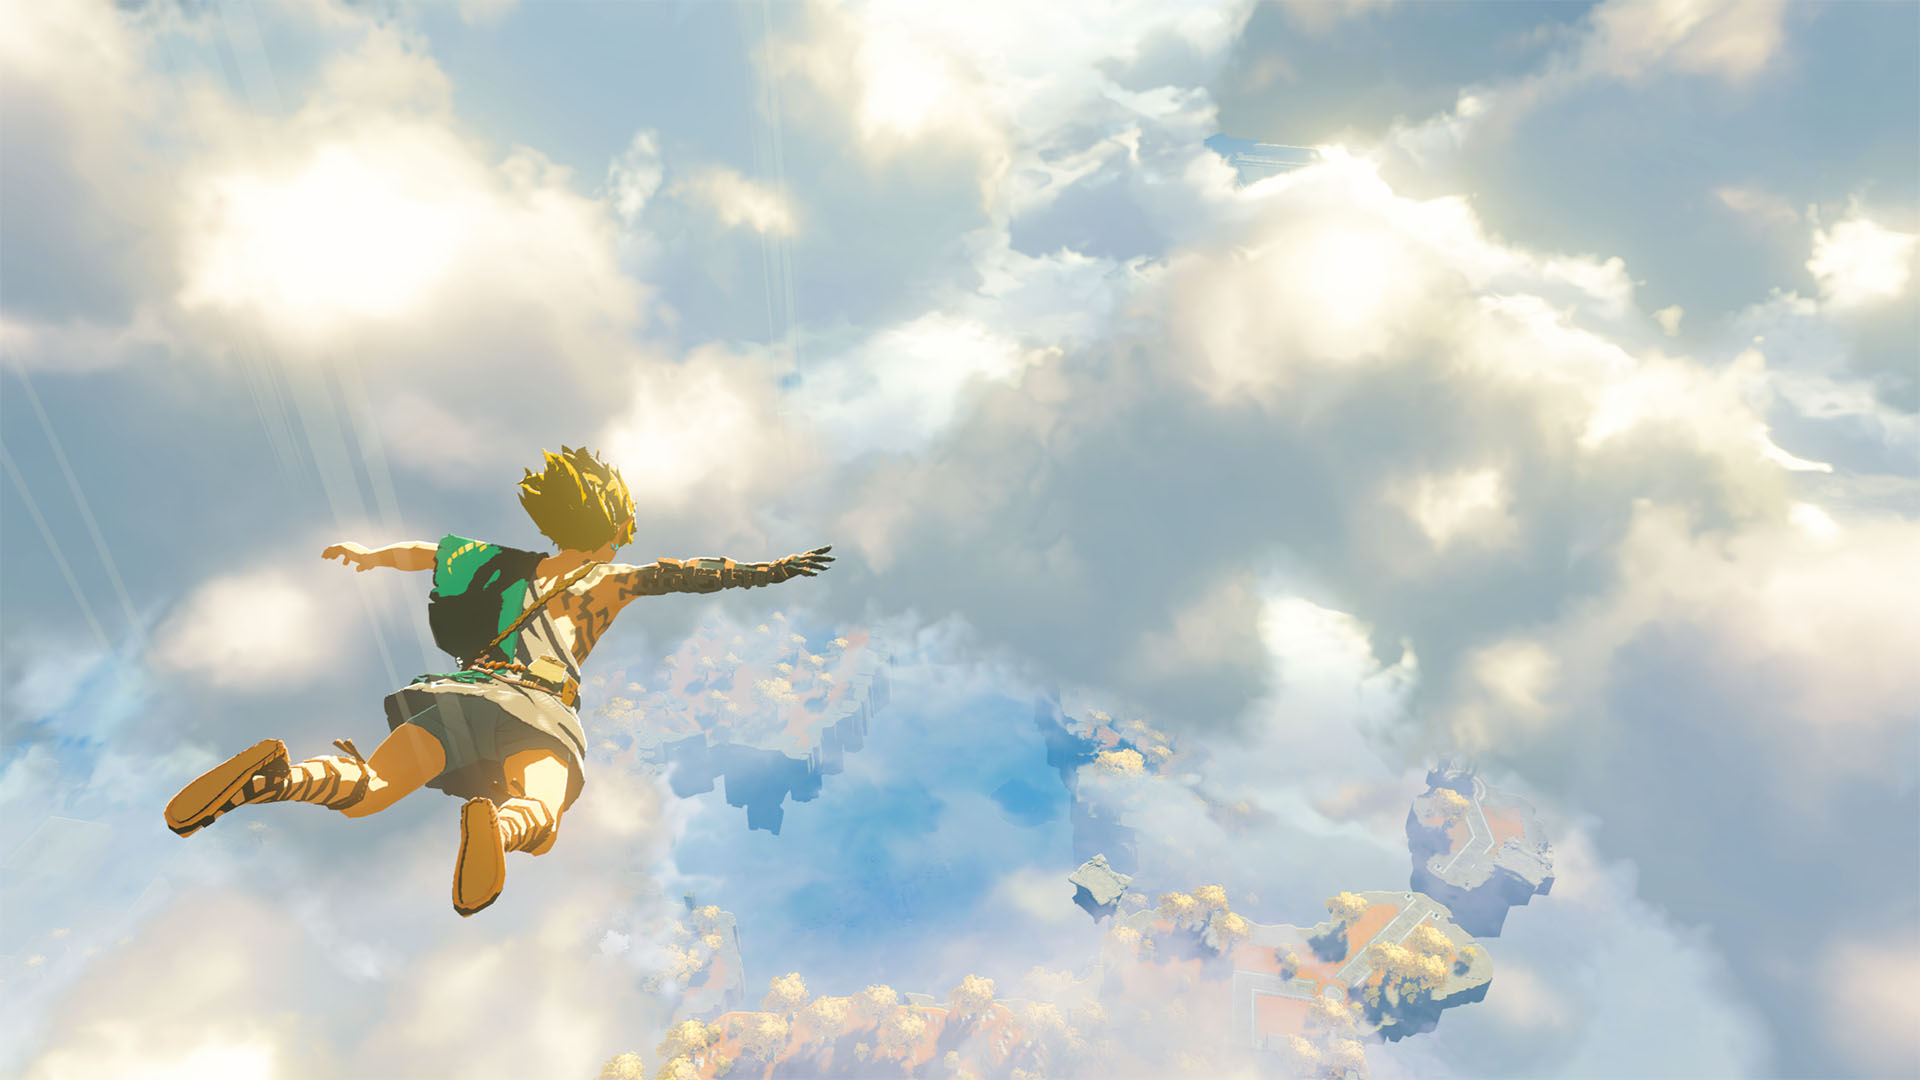 A video game screenshot of a blonde, humanoid, wearing a toga-like outfit with an offshoulder cloak, strap sandals, and a back tattoo, falling through an opening of clouds in the sky.